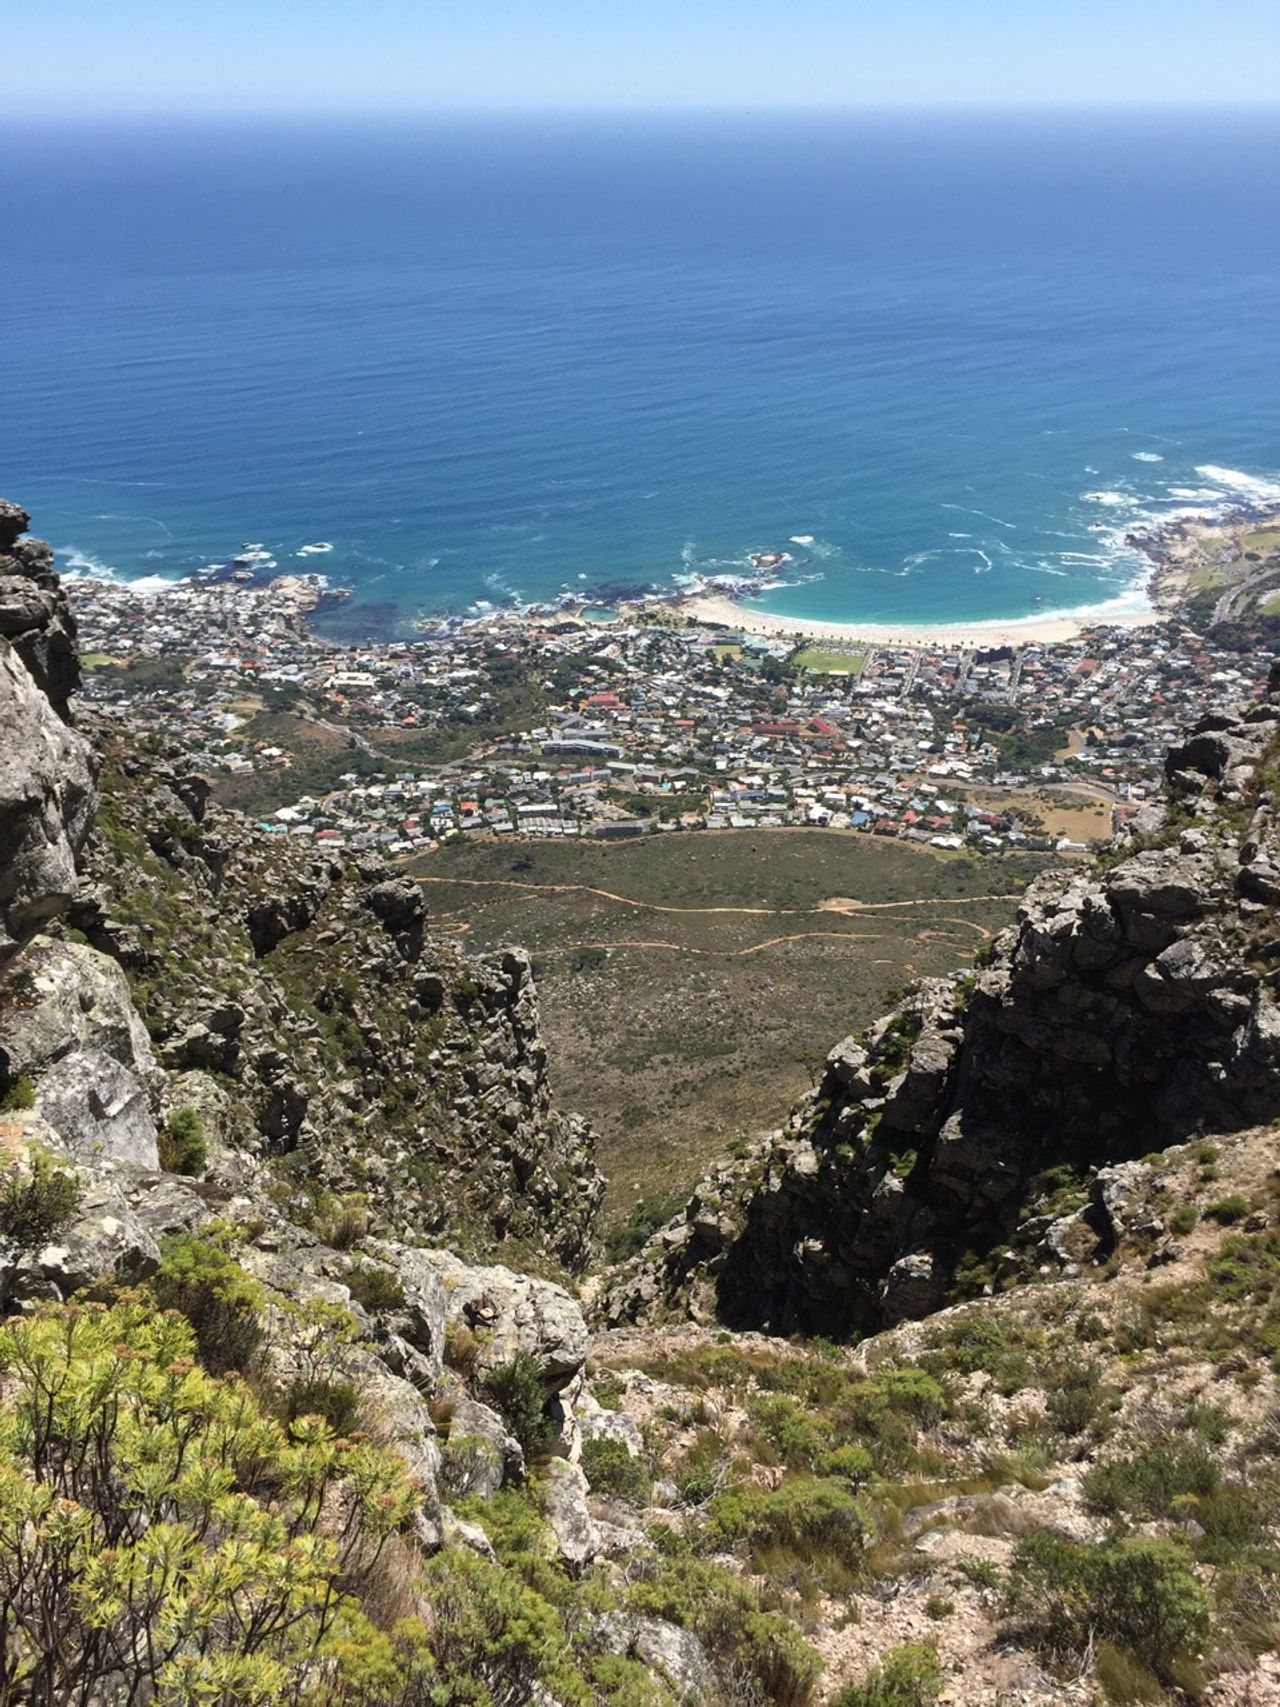 Looking to the southwest as we traverse one of the 12 apostles of Table Mountain.